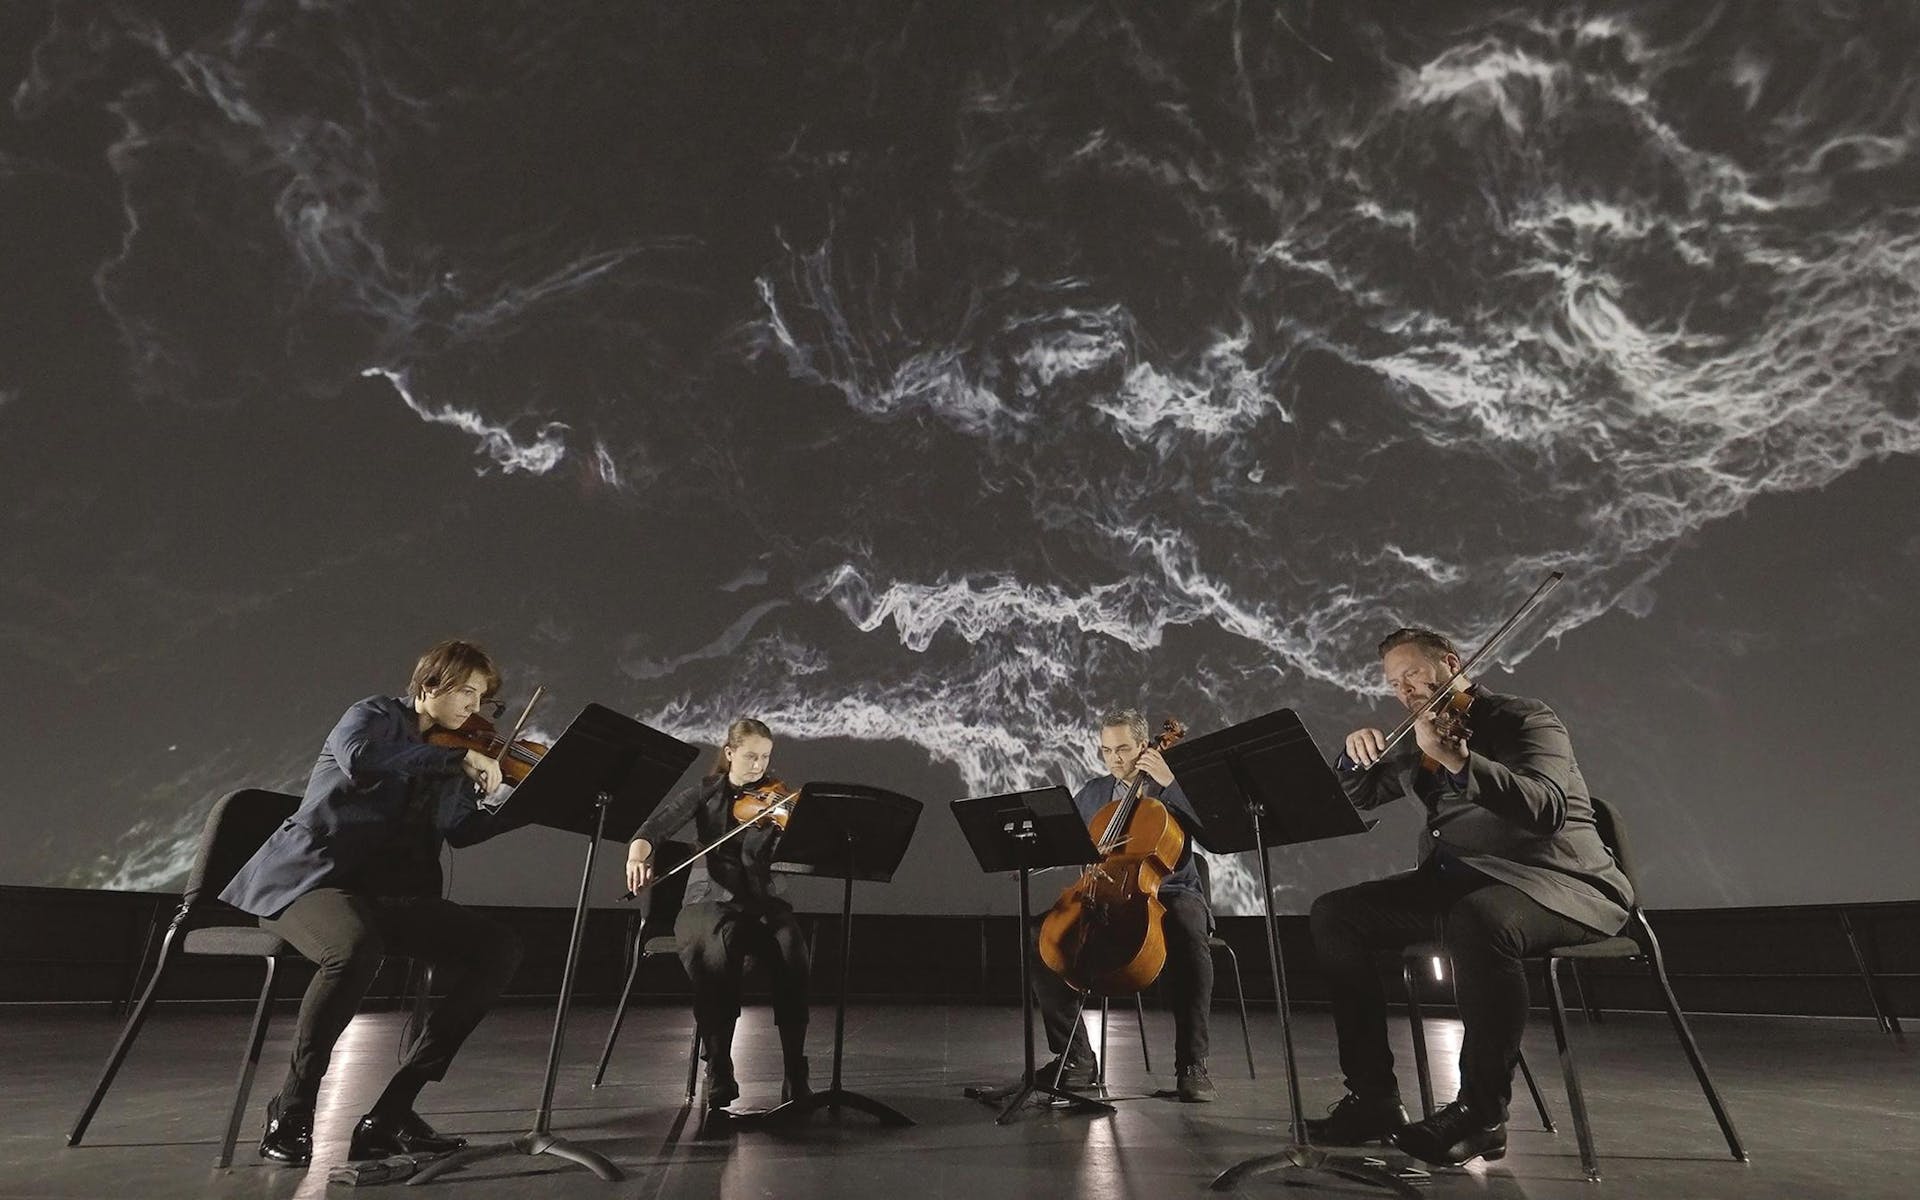 A quartet plays string instraments underneath a large projection of a space rock.